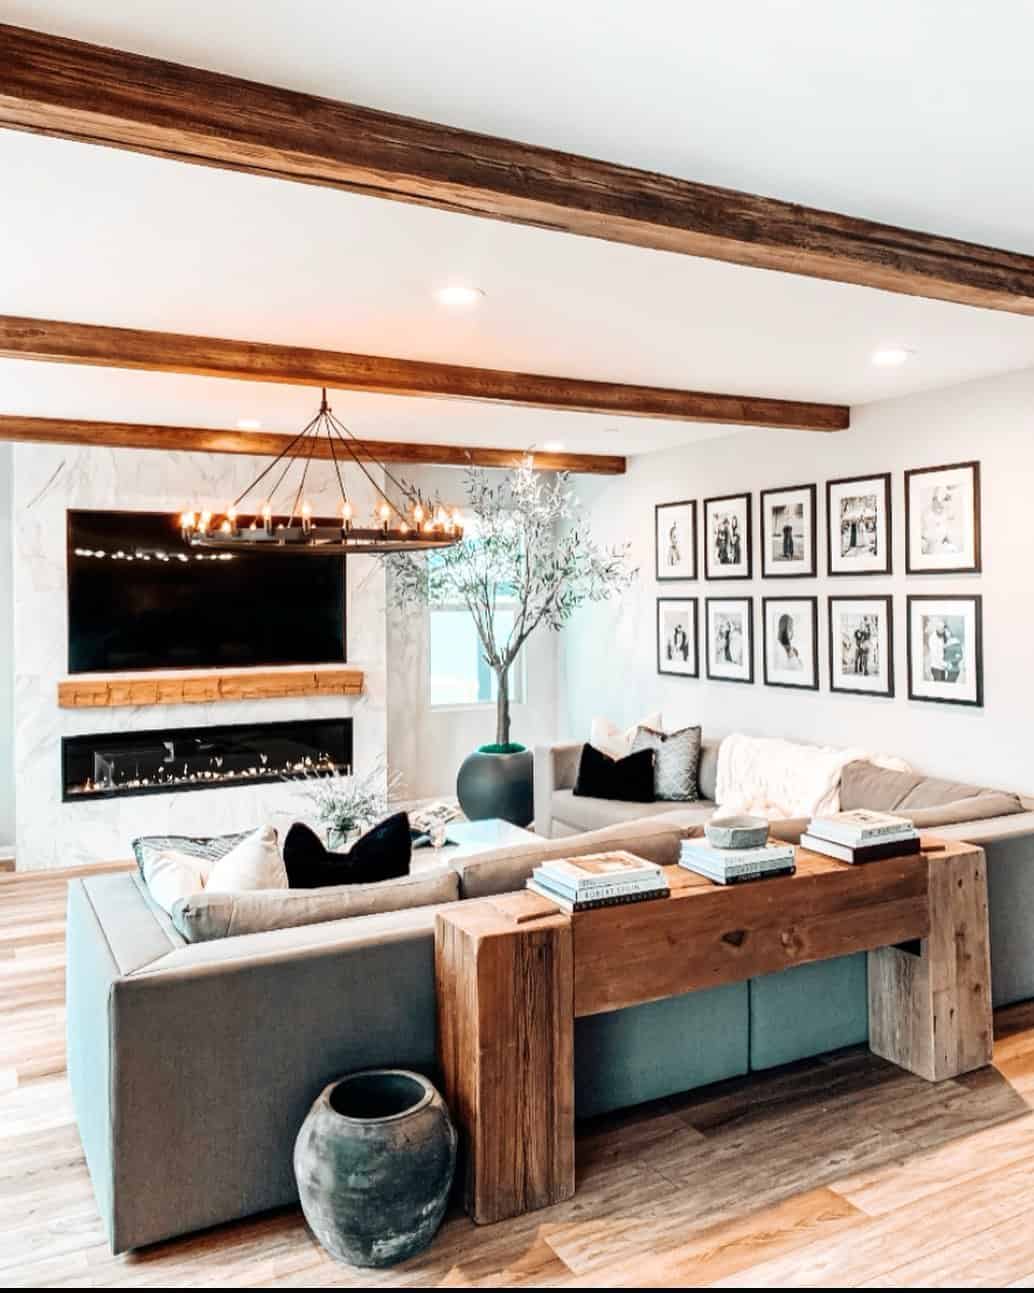 Cozy Living Beneath Low Ceilings with Exposed Rustic Wood Beams